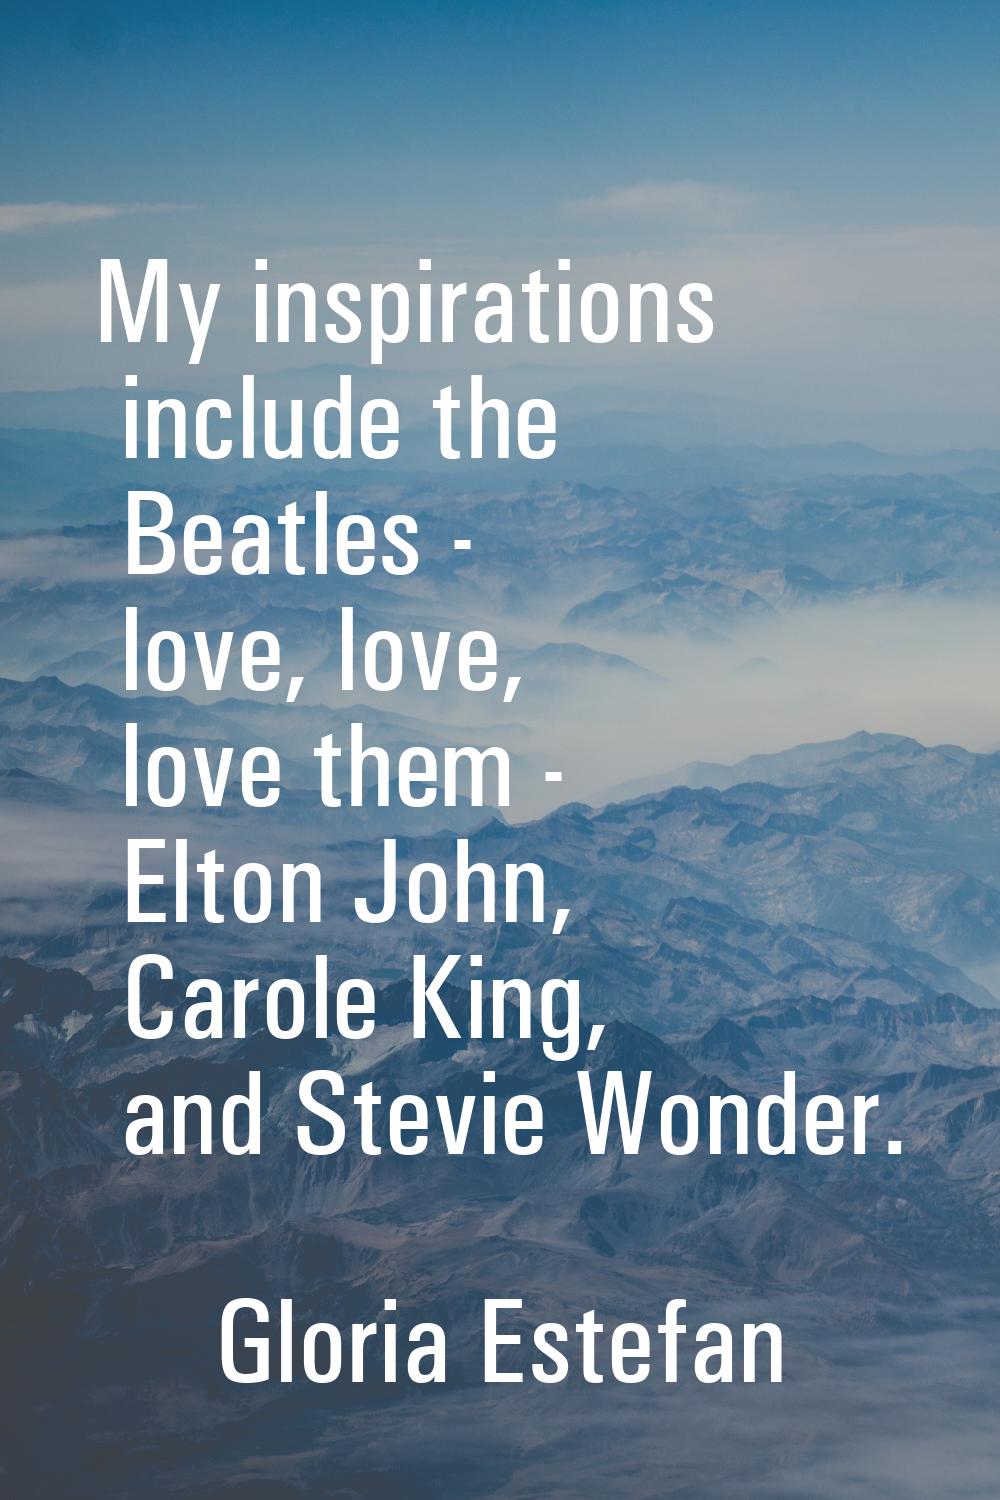 My inspirations include the Beatles - love, love, love them - Elton John, Carole King, and Stevie W